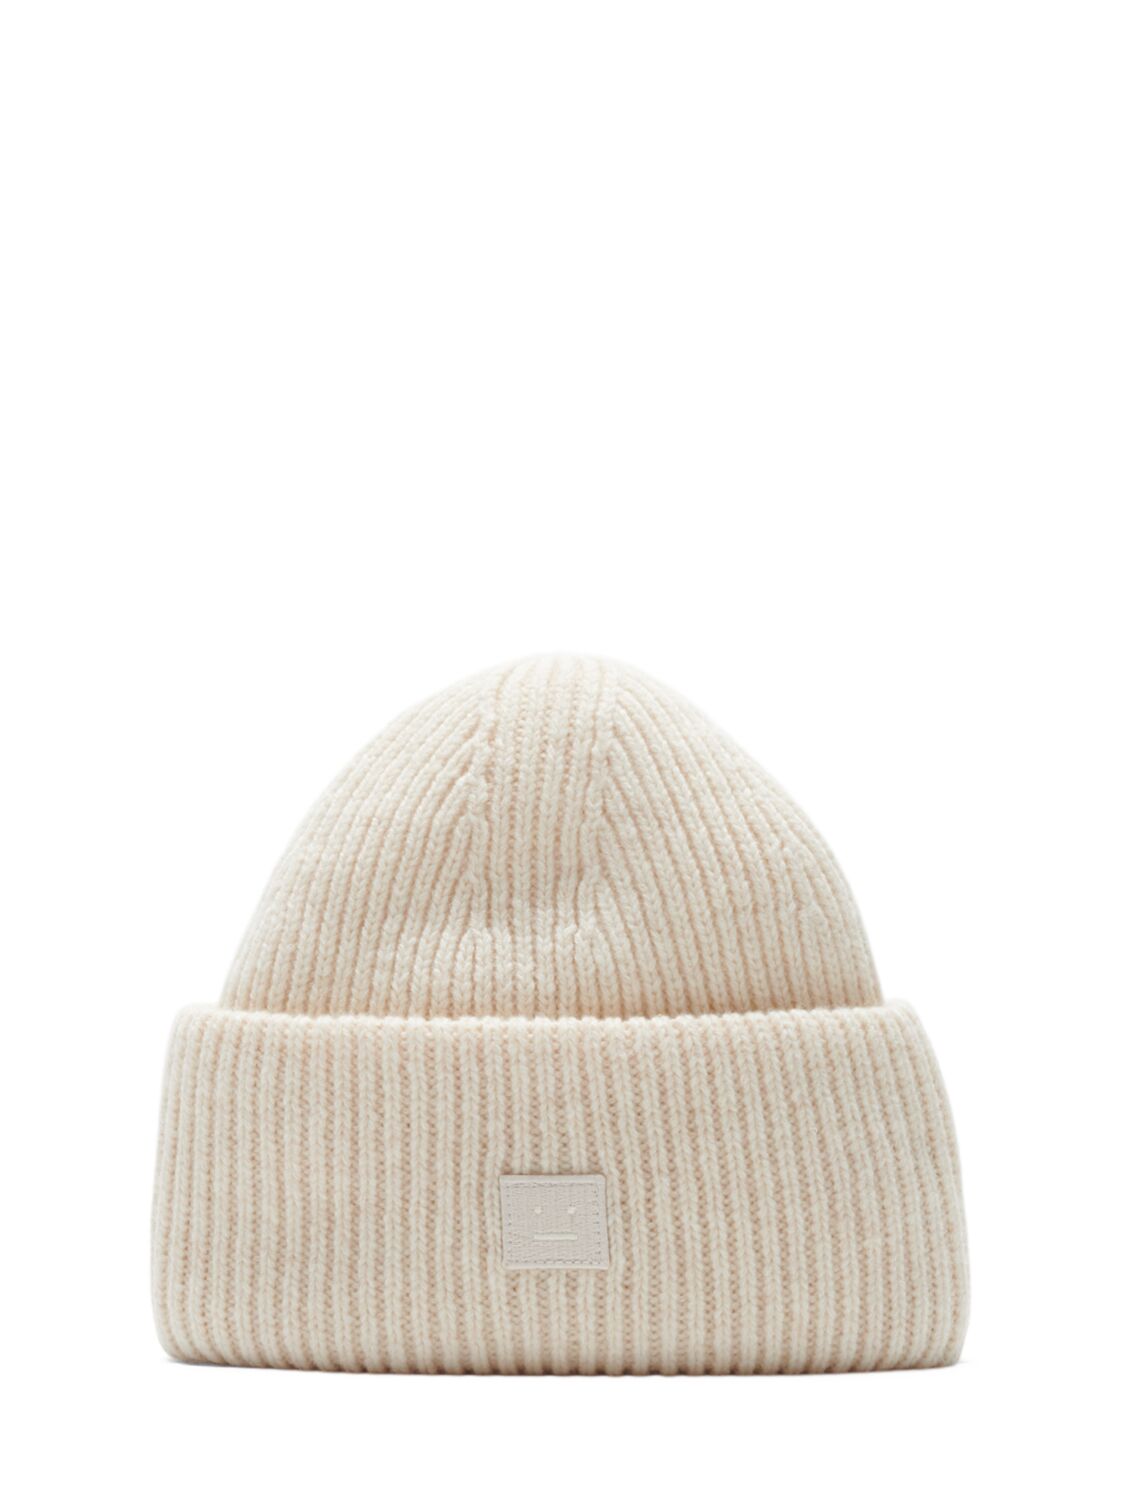 Acne Studios Pana Face Wool Hat In Neutral